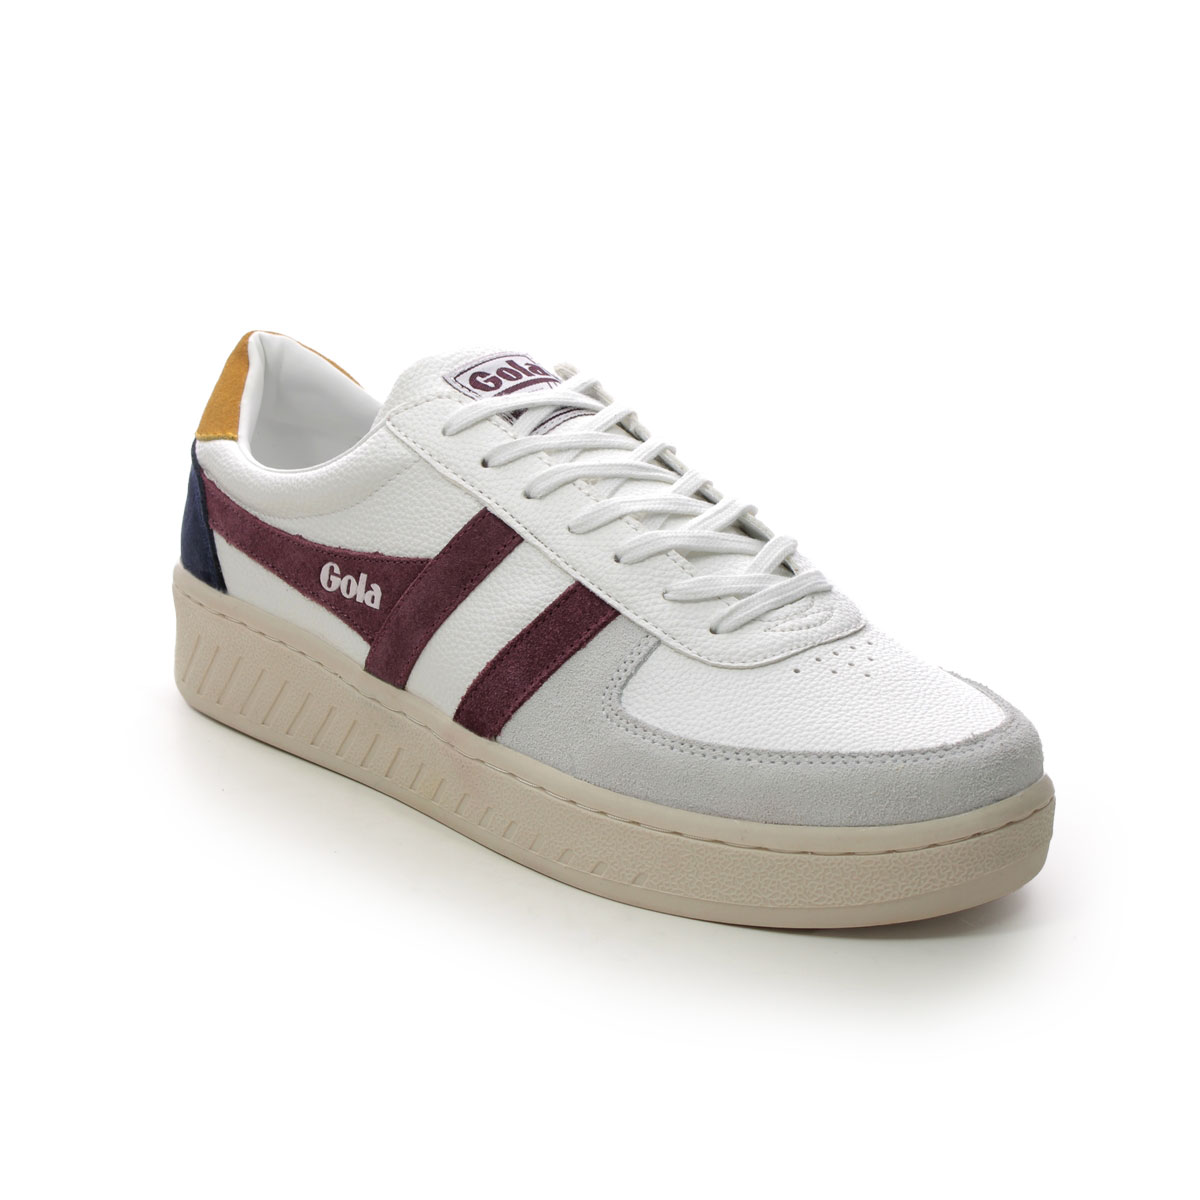 Gola Grandslam Mens Trident White multi Mens trainers CMA415-WR in a Plain Leather in Size 8